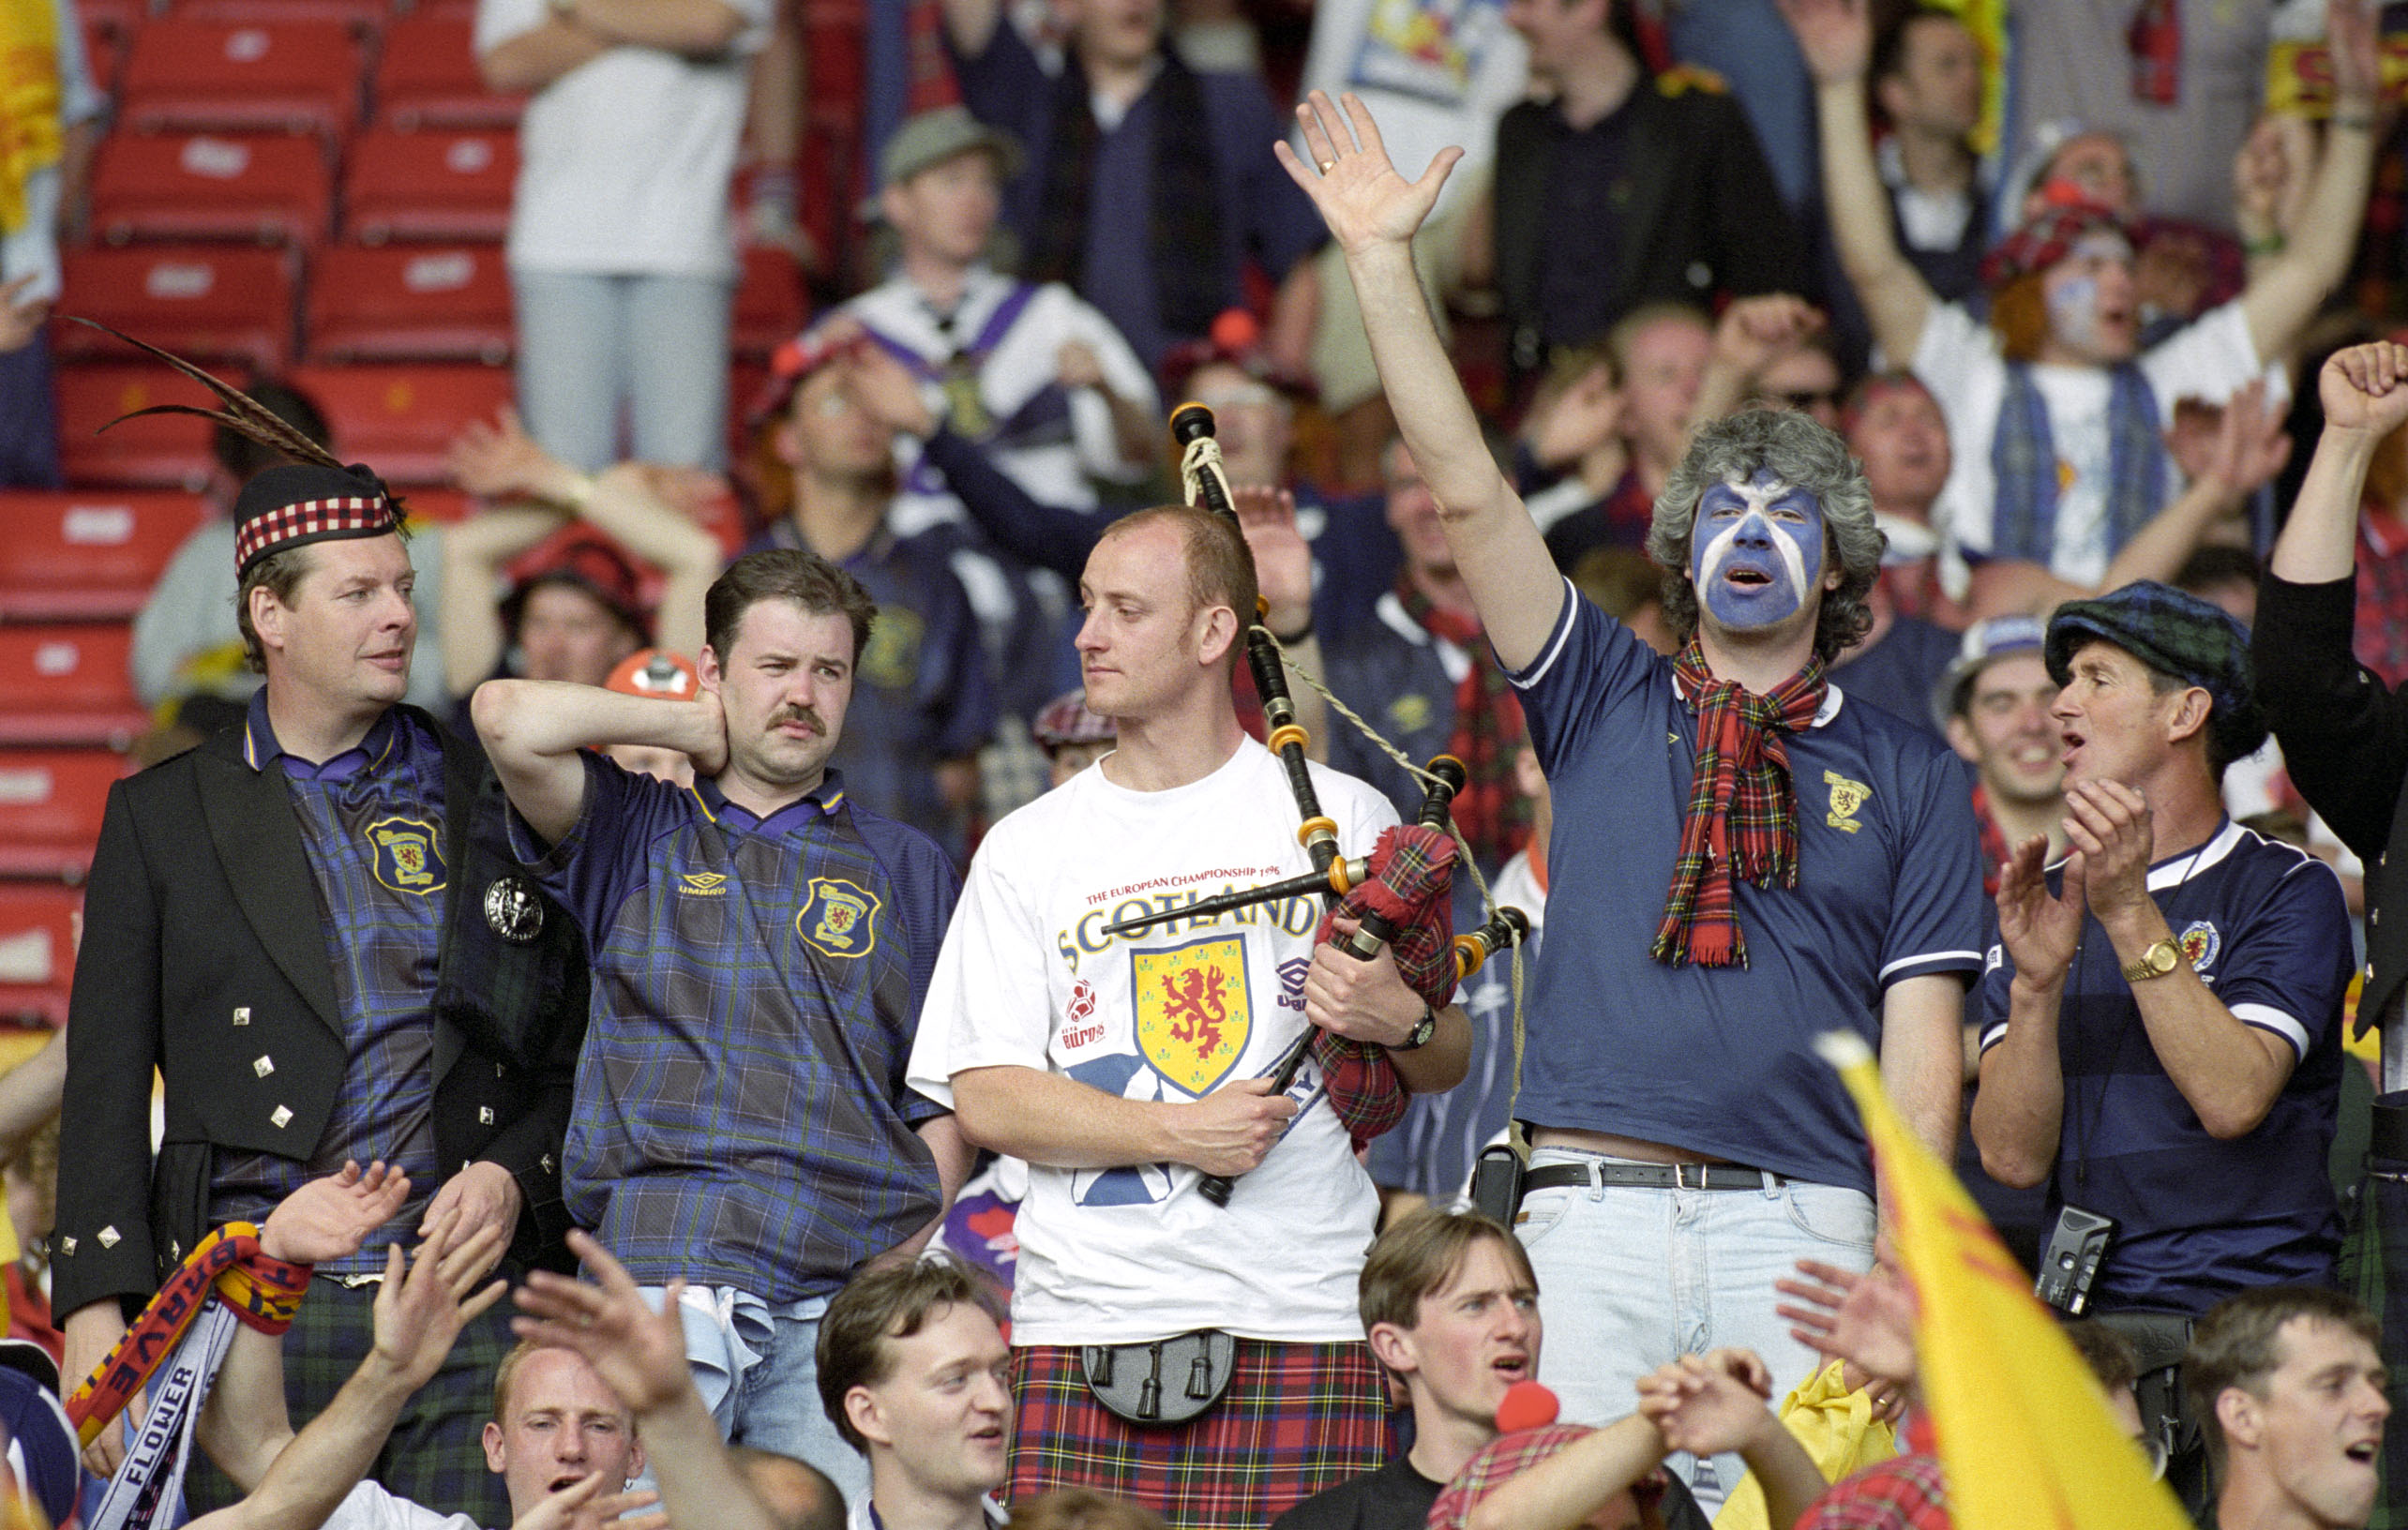 Scotland fans are looking forward to their first Euros since 1996.